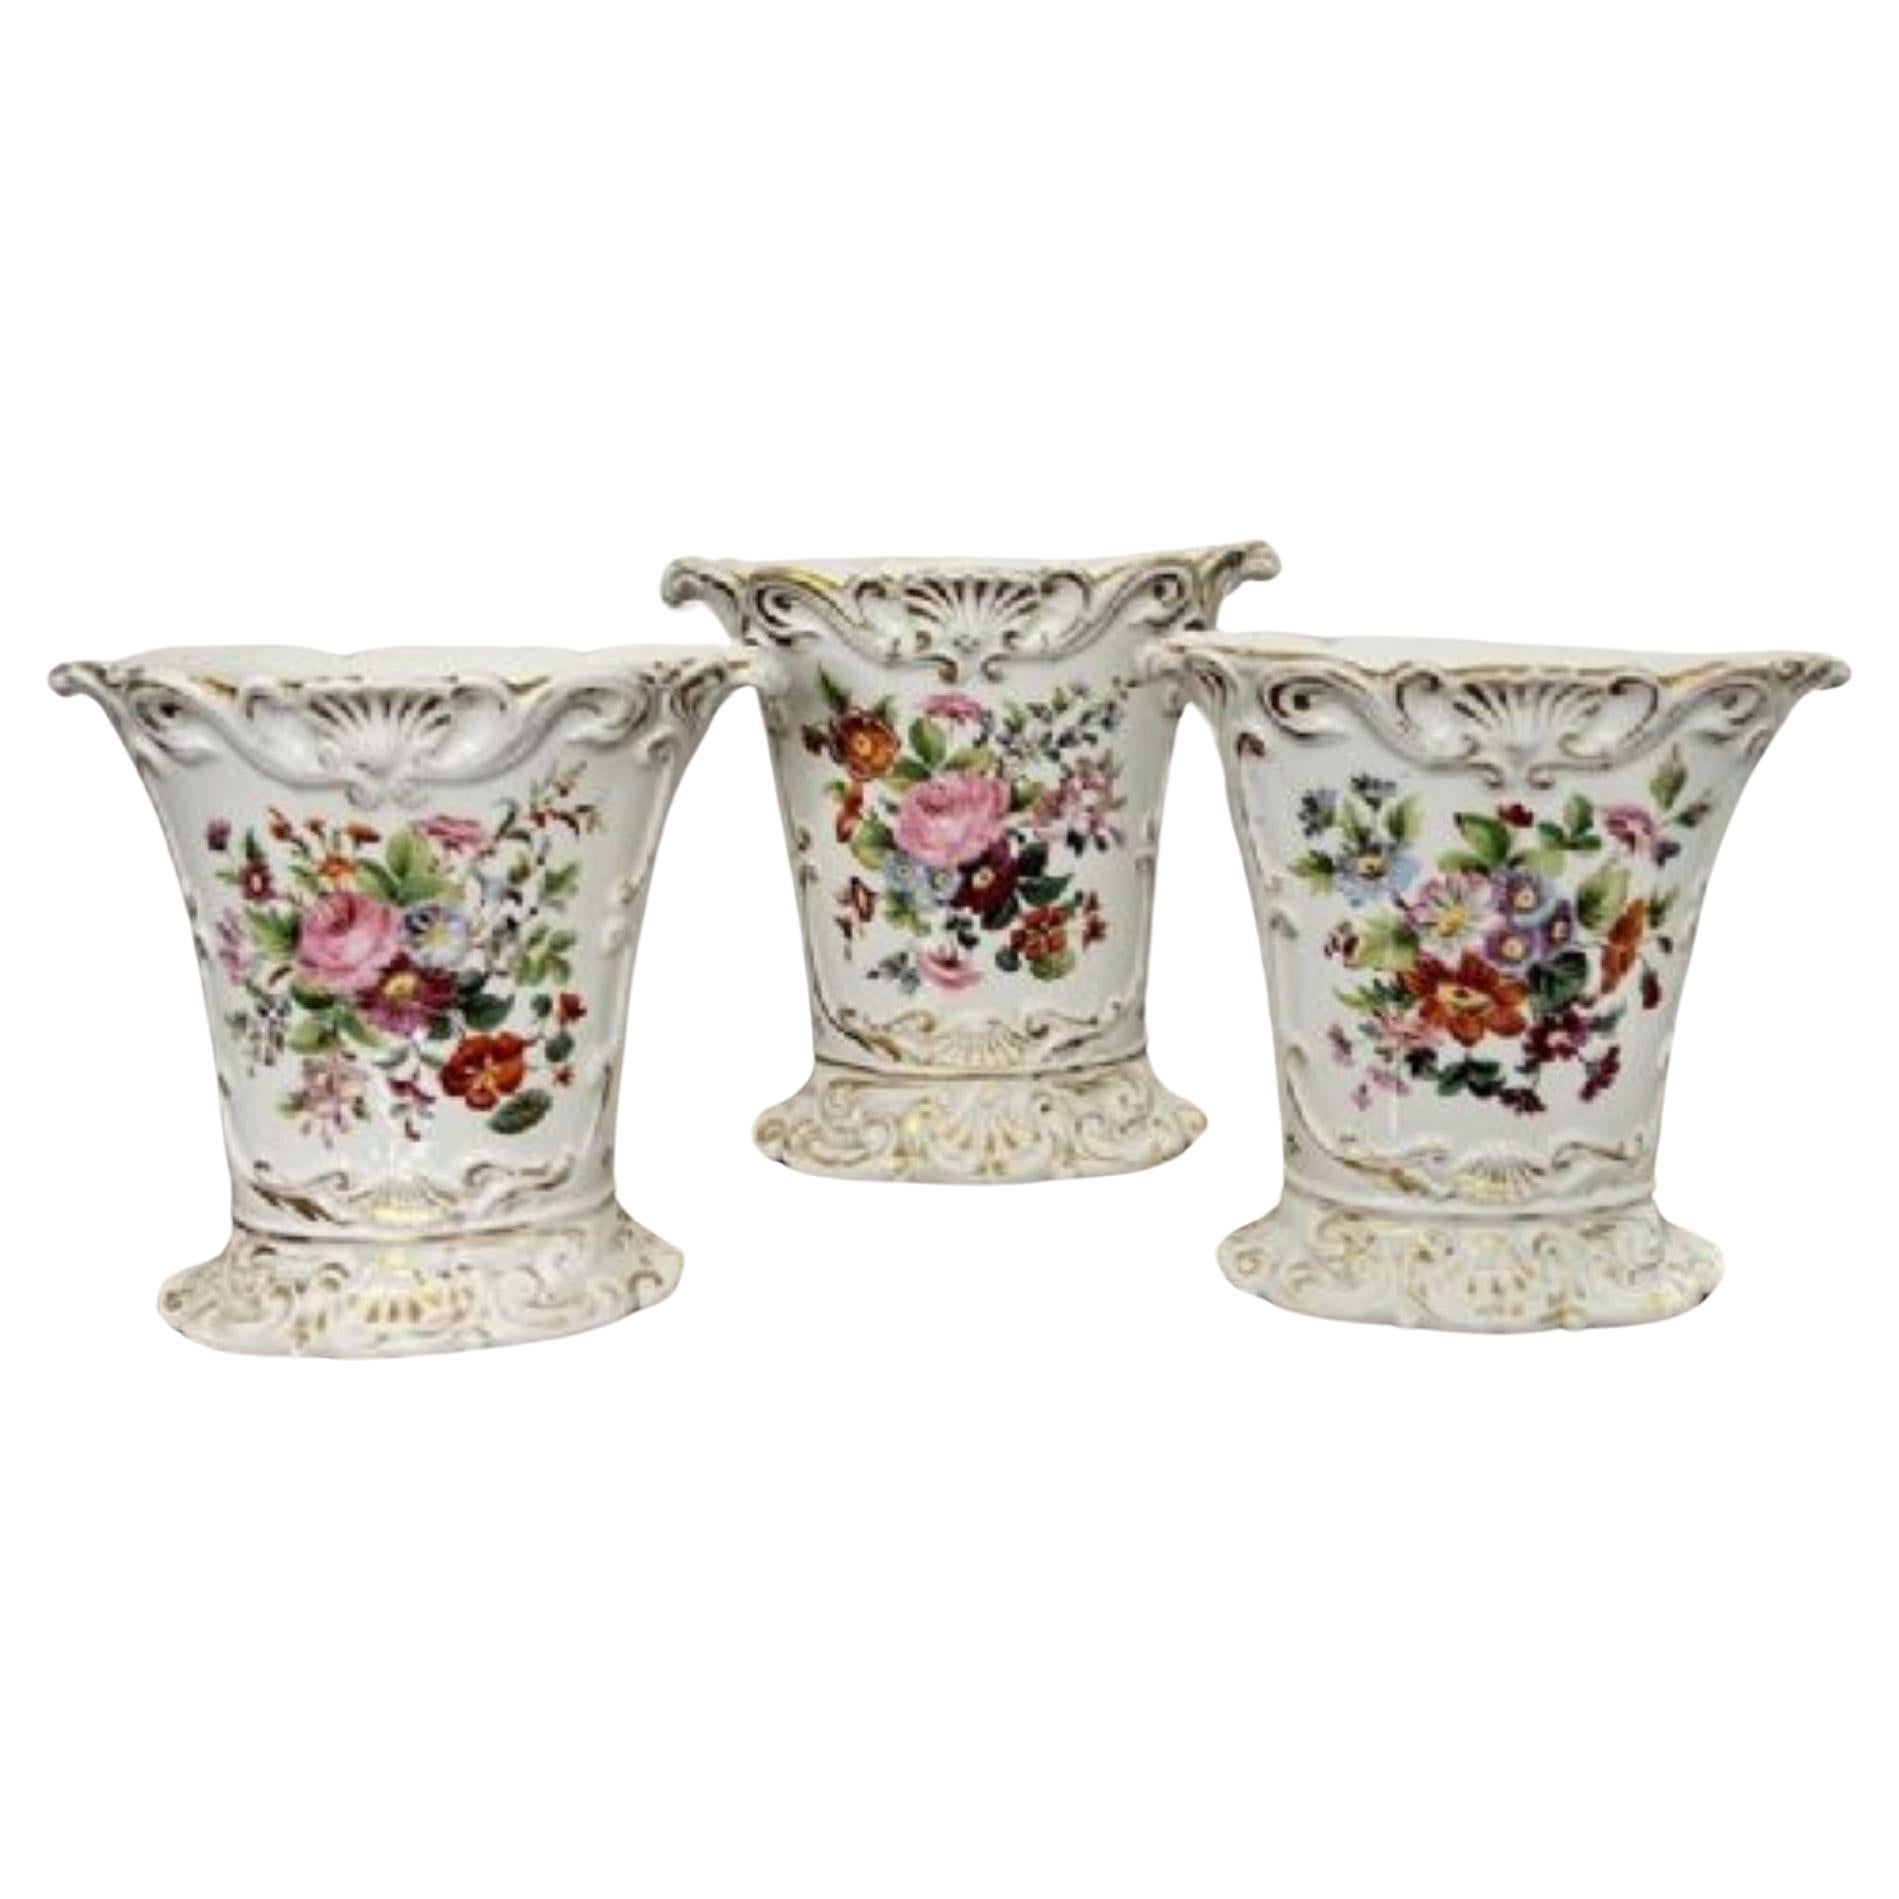 Fantastic quality garniture of three 19th century French vases For Sale